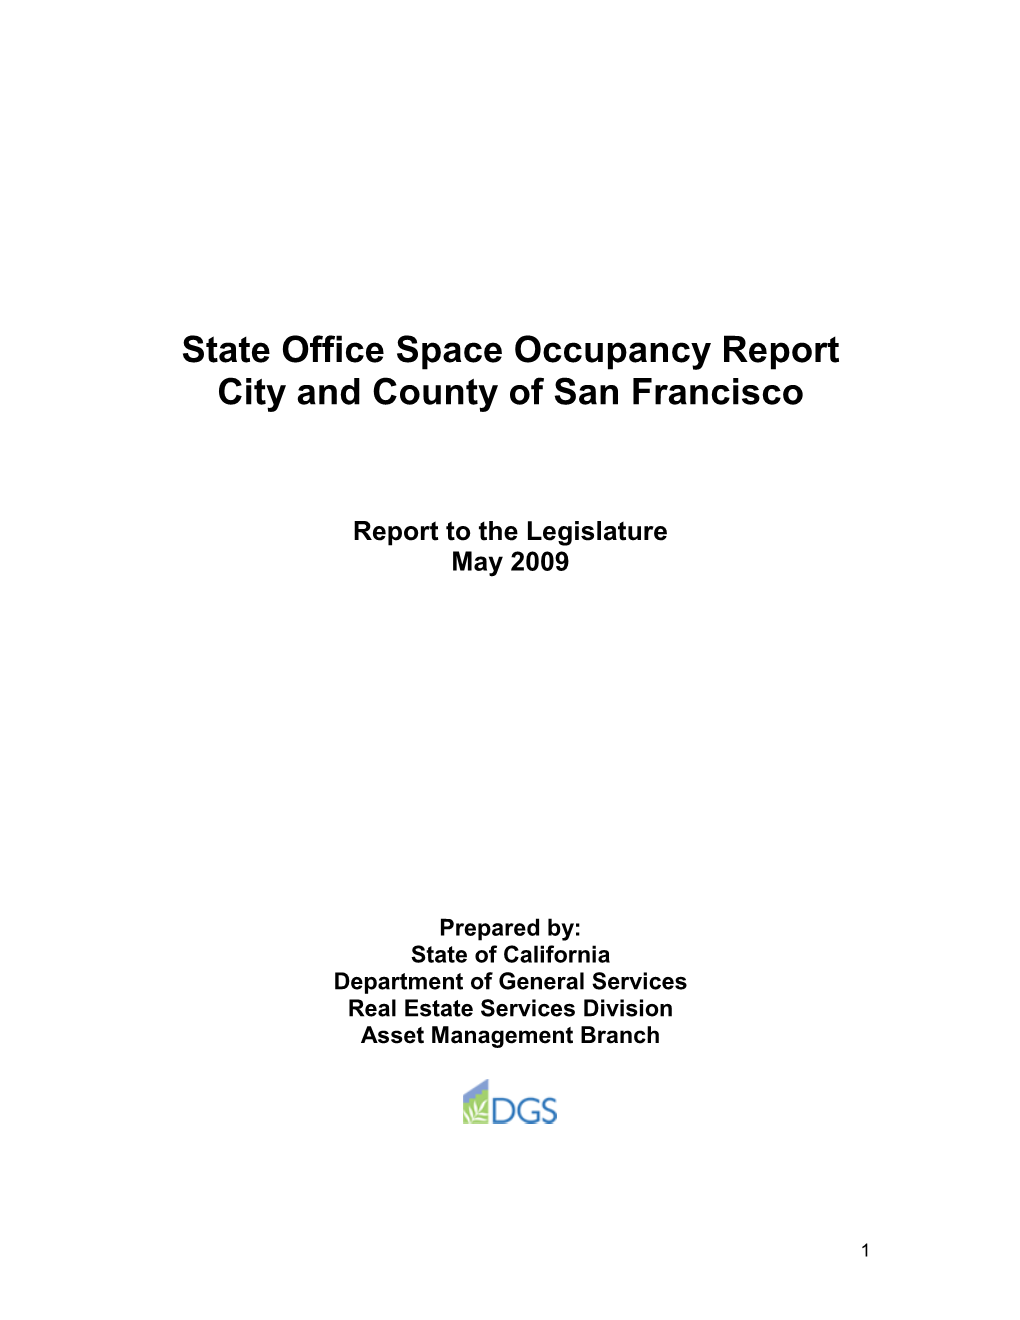 Space Consolidation in San Francisco Report